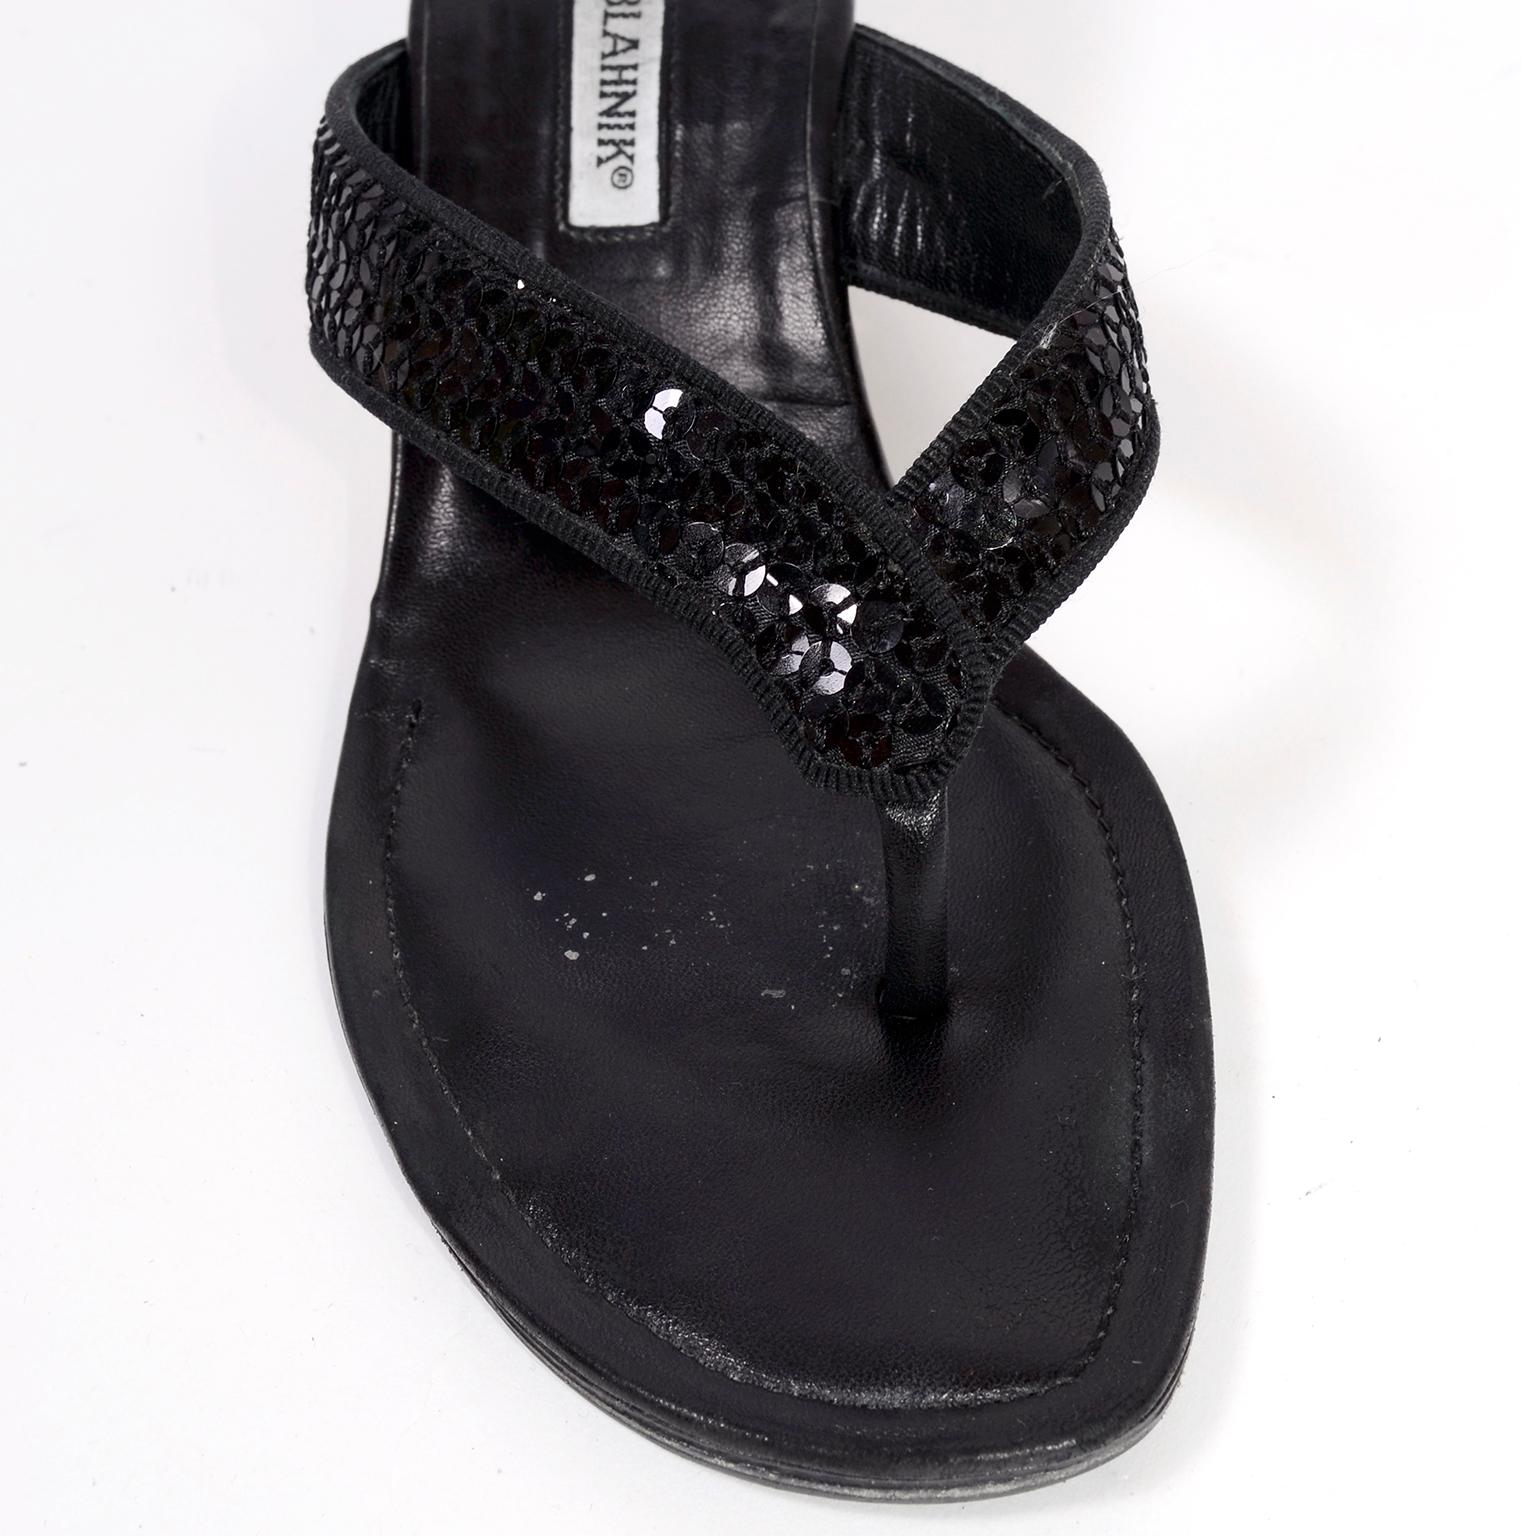 Manolo Blahnik Shoes Black Leather Thong Sandals With Sequins & Heels 38.5 3